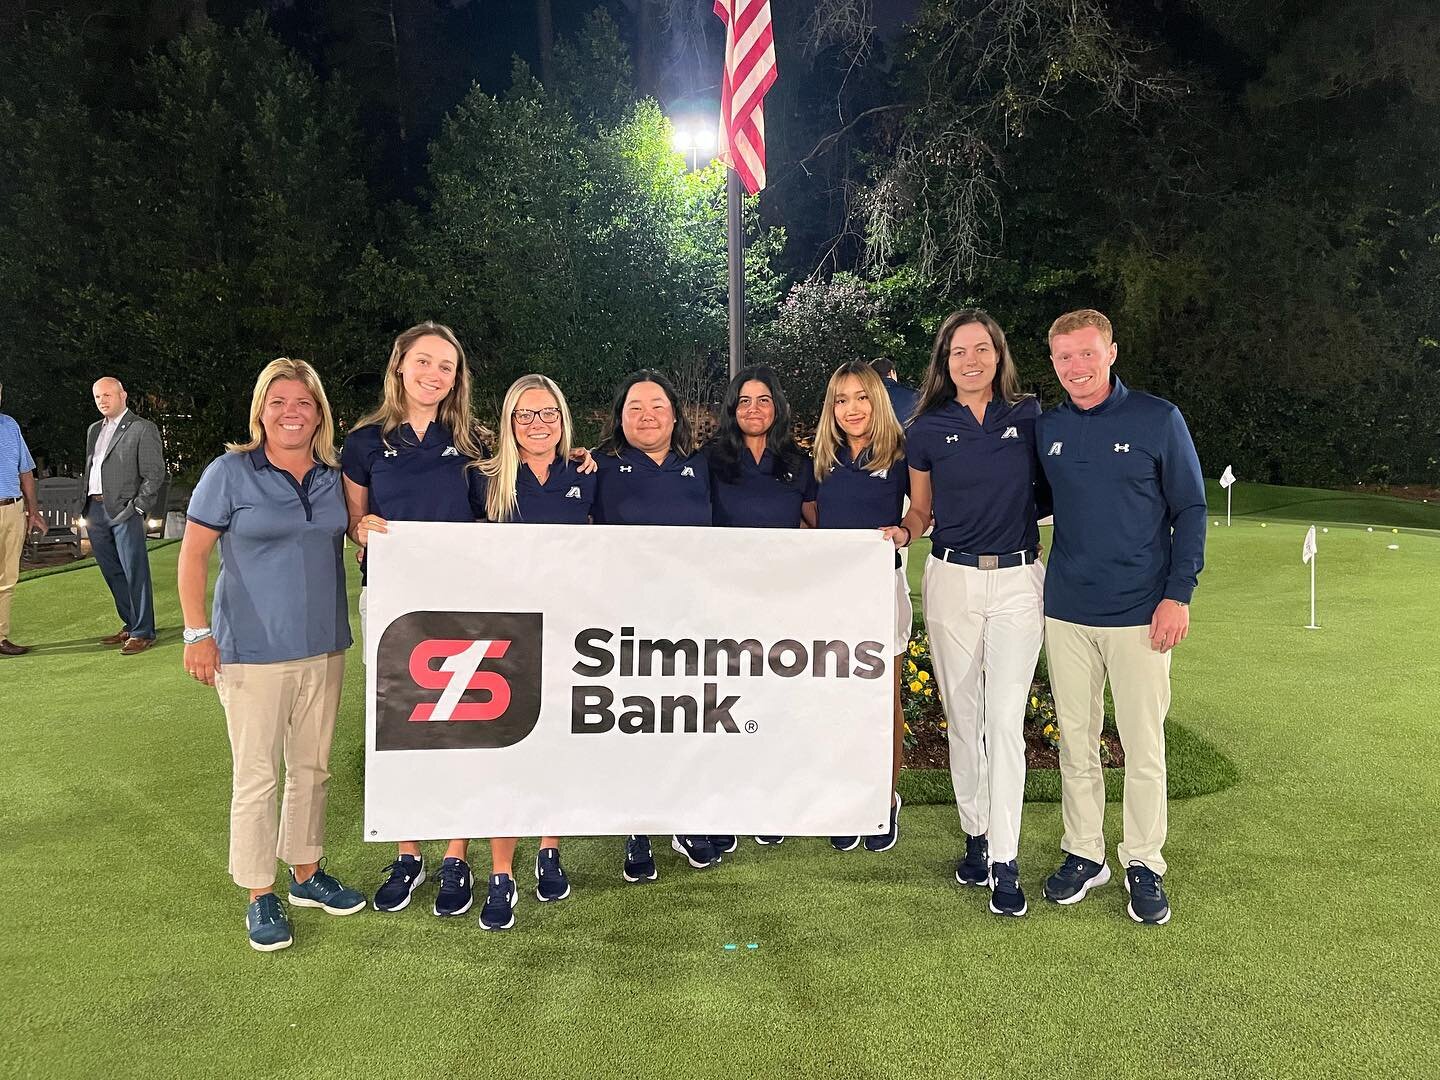 Thanks @simmonsbank for sponsoring our #AugustaBirdieClub social! We look forward to the Scramble Tournament today at @foresthillsgolfclub #GoJags #SupportAugustaGolf